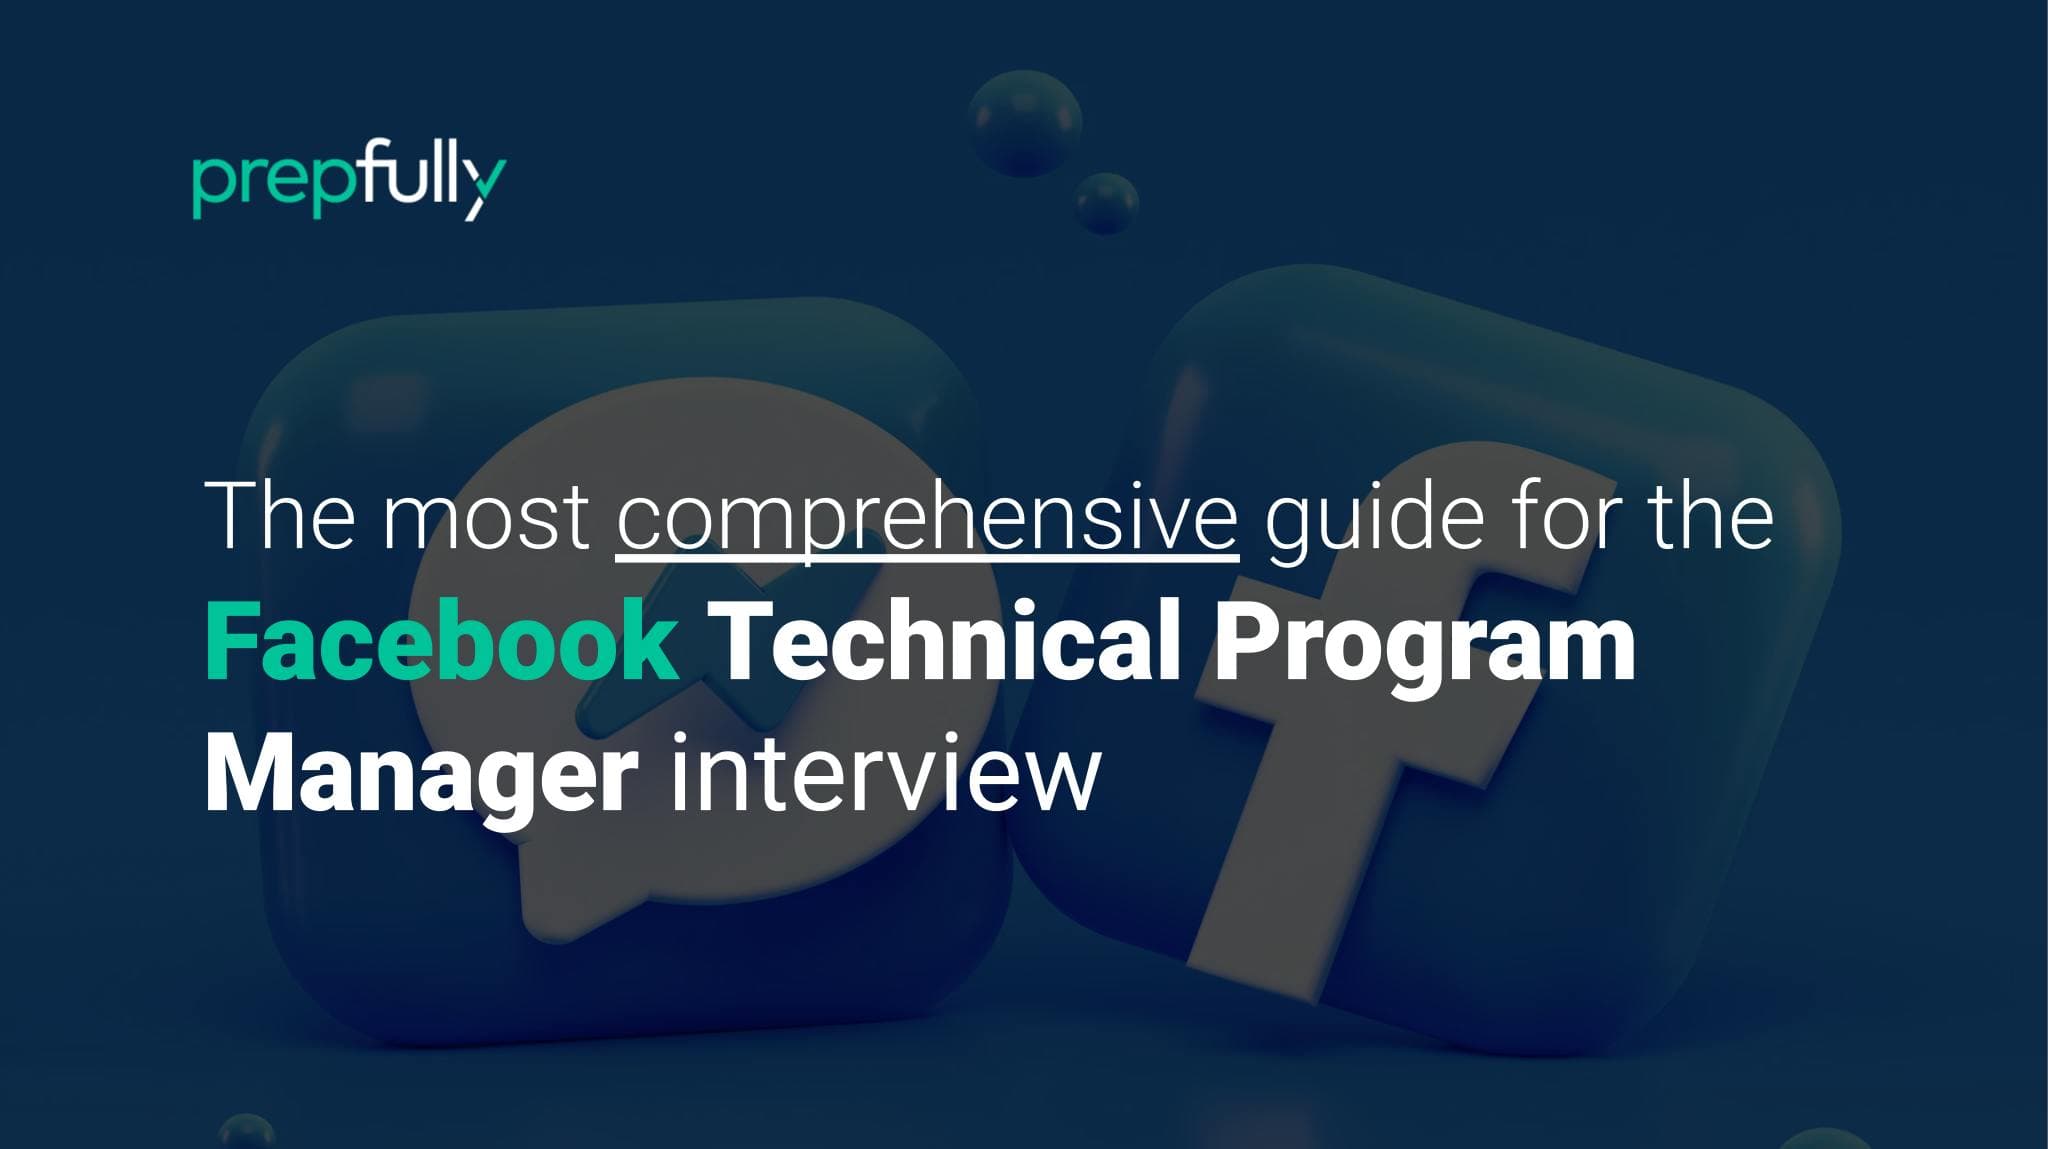 Interview guide for Facebook Technical Program Manager